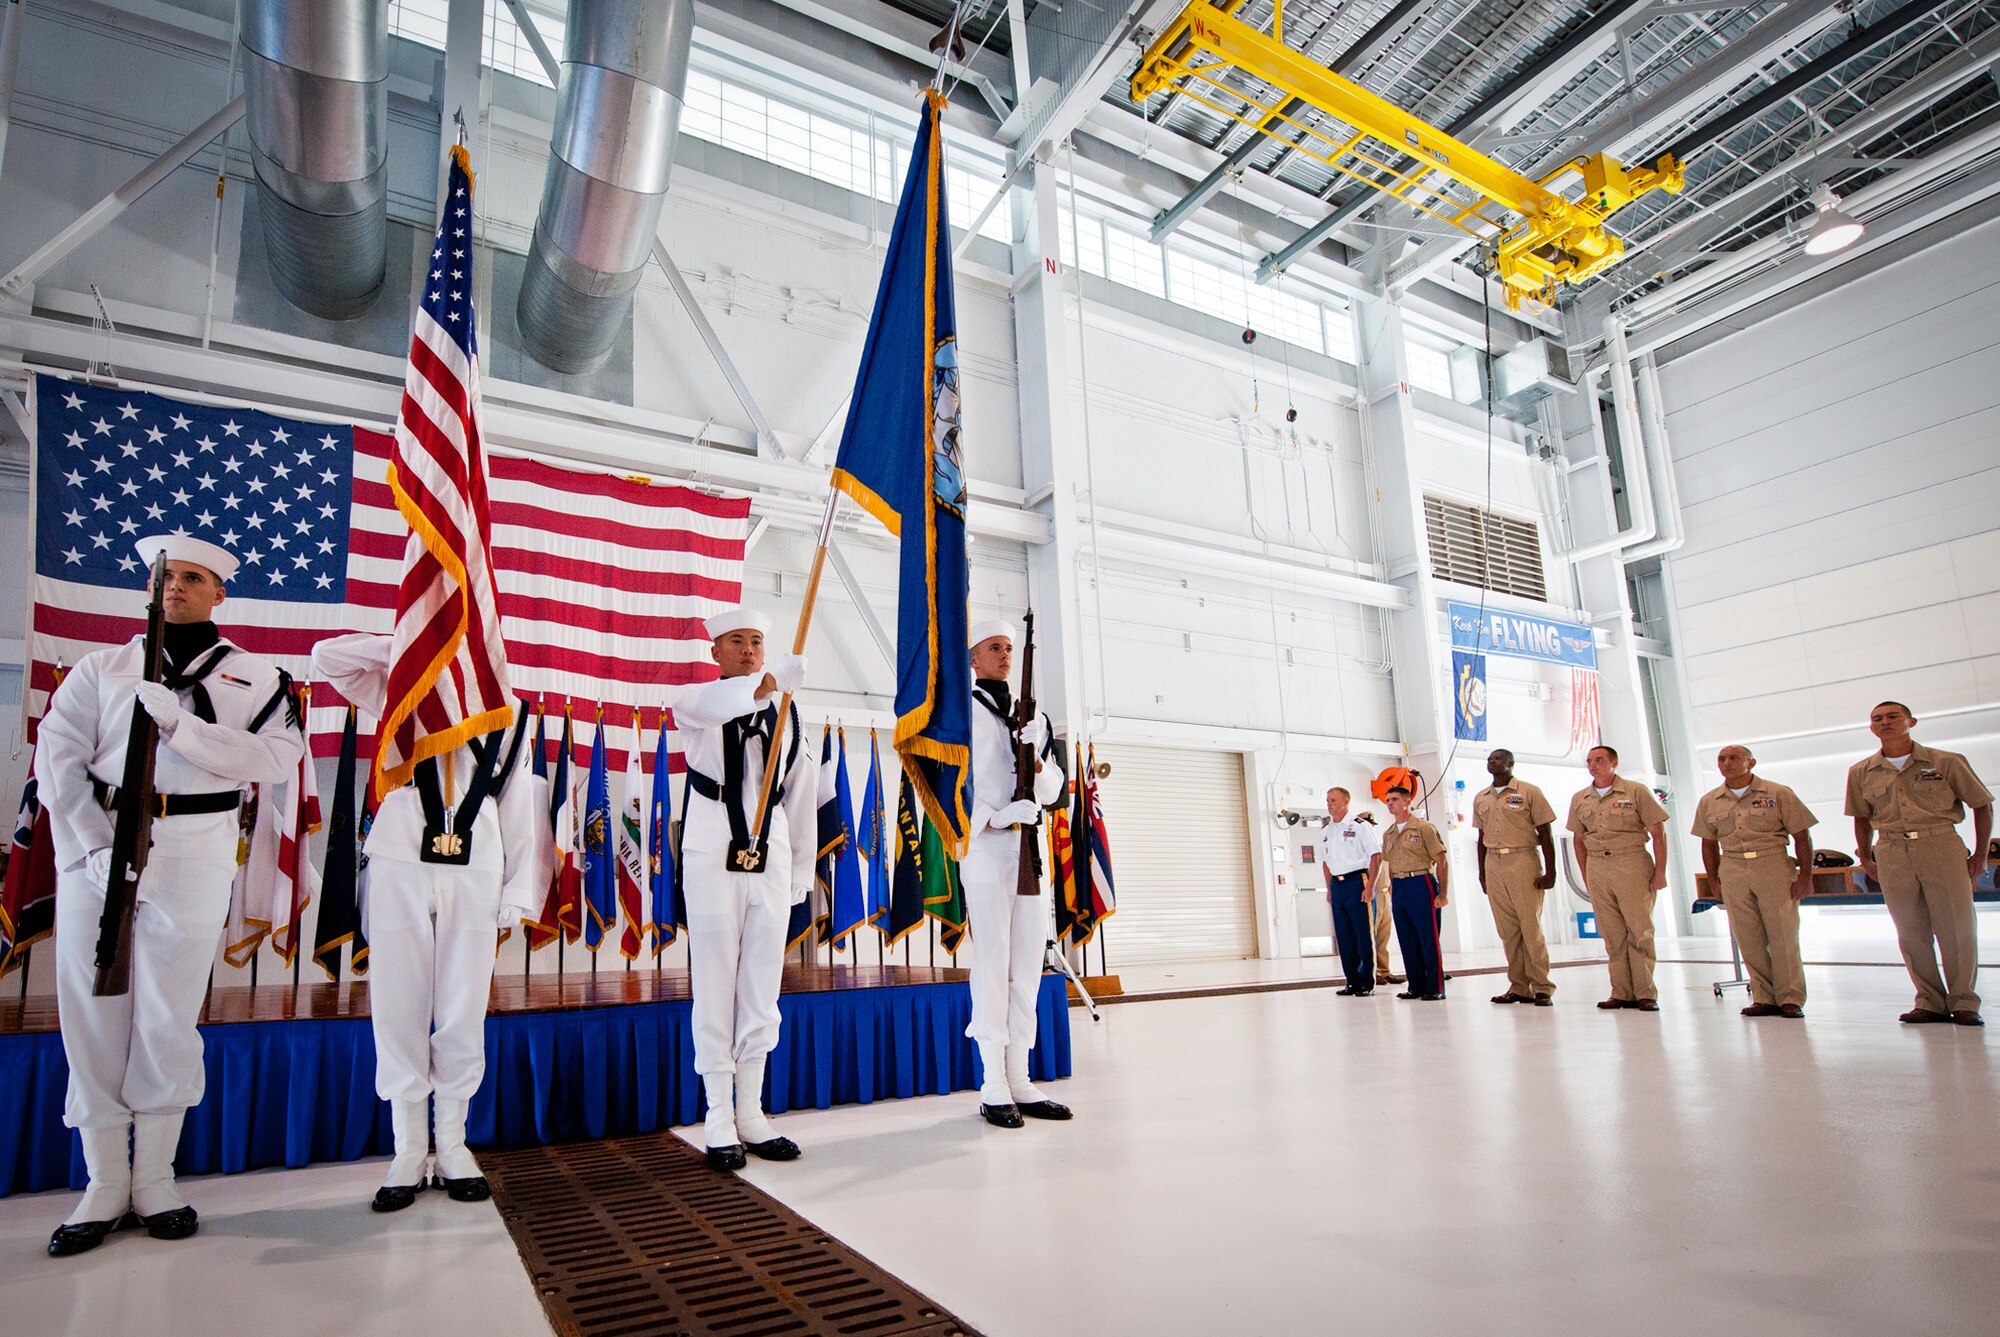 The new chief petty officer selectees watch as Naval Air Station Pensacola’s color guard presents the colors at the beginning of a chief petty officer pinning ceremony held by the Navy's F-35 Lightning II squadron, VFA-101, Sept. 14 at Eglin Air Force Base, Fla. The ceremony formally marks the transition from E-6 to chief.  There were four Sailors who pinned on the new rank. A Marine and a Soldier were also pinned as honorary chiefs.  (U.S. Air Force photo/Samuel King Jr.)